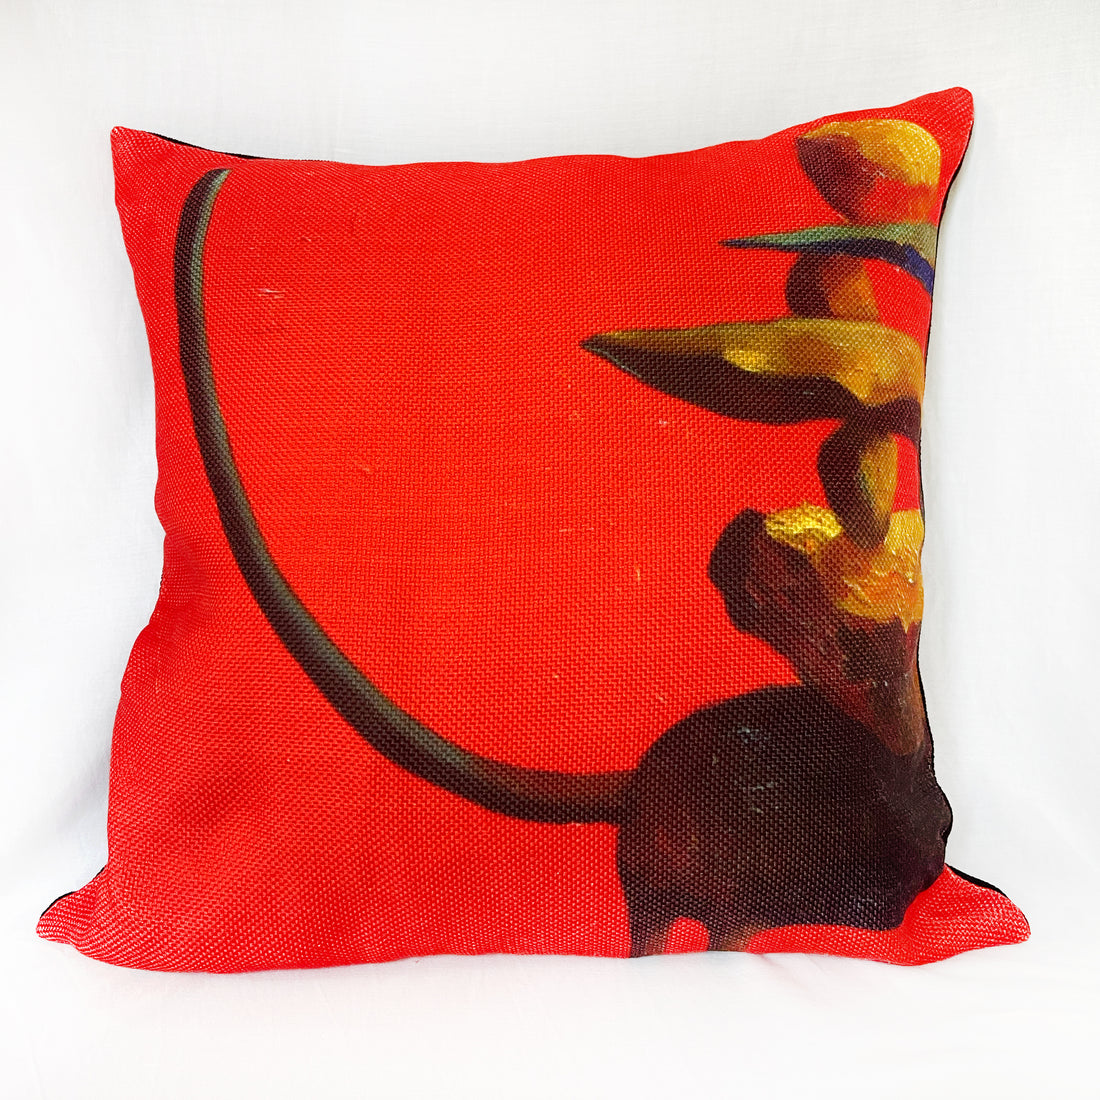 Copy of The red cat Linen pillow (2/2)